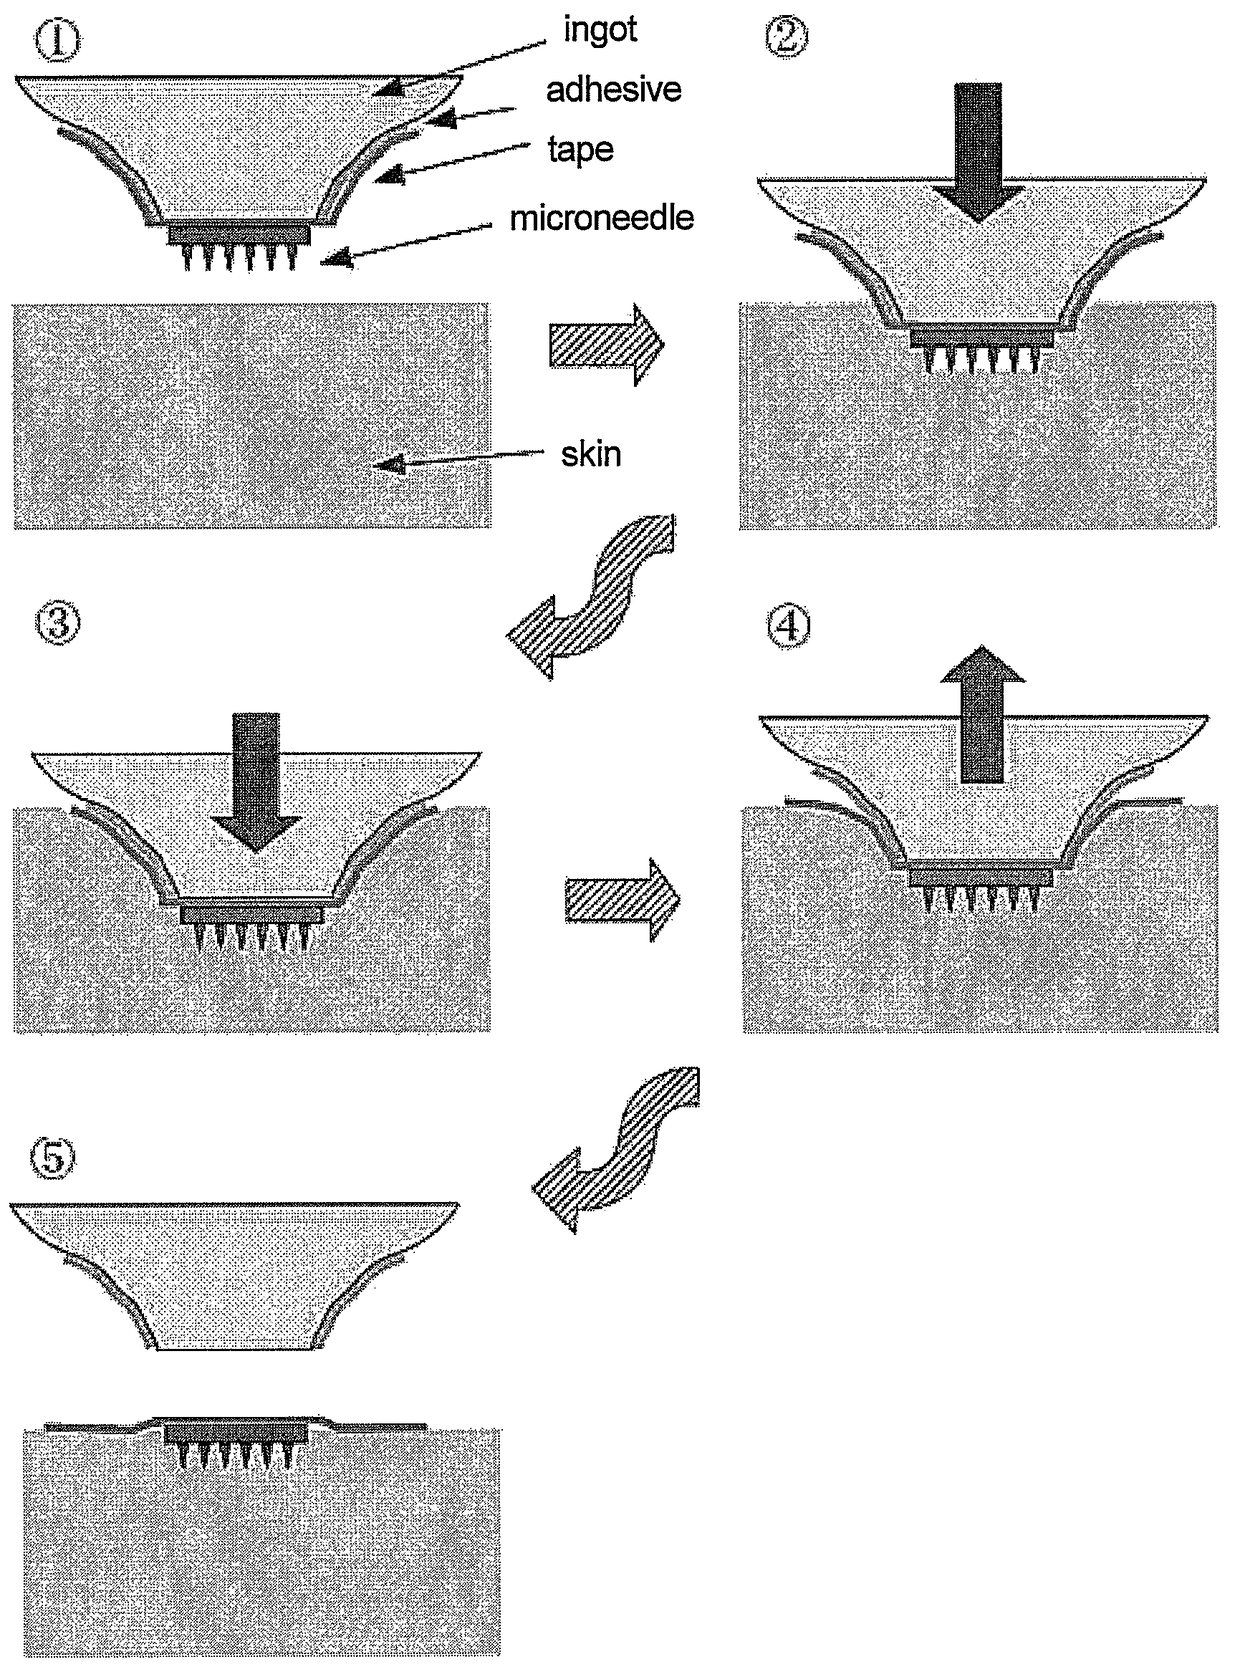 Adhesive patching aid for microneedle adhesive skin patch